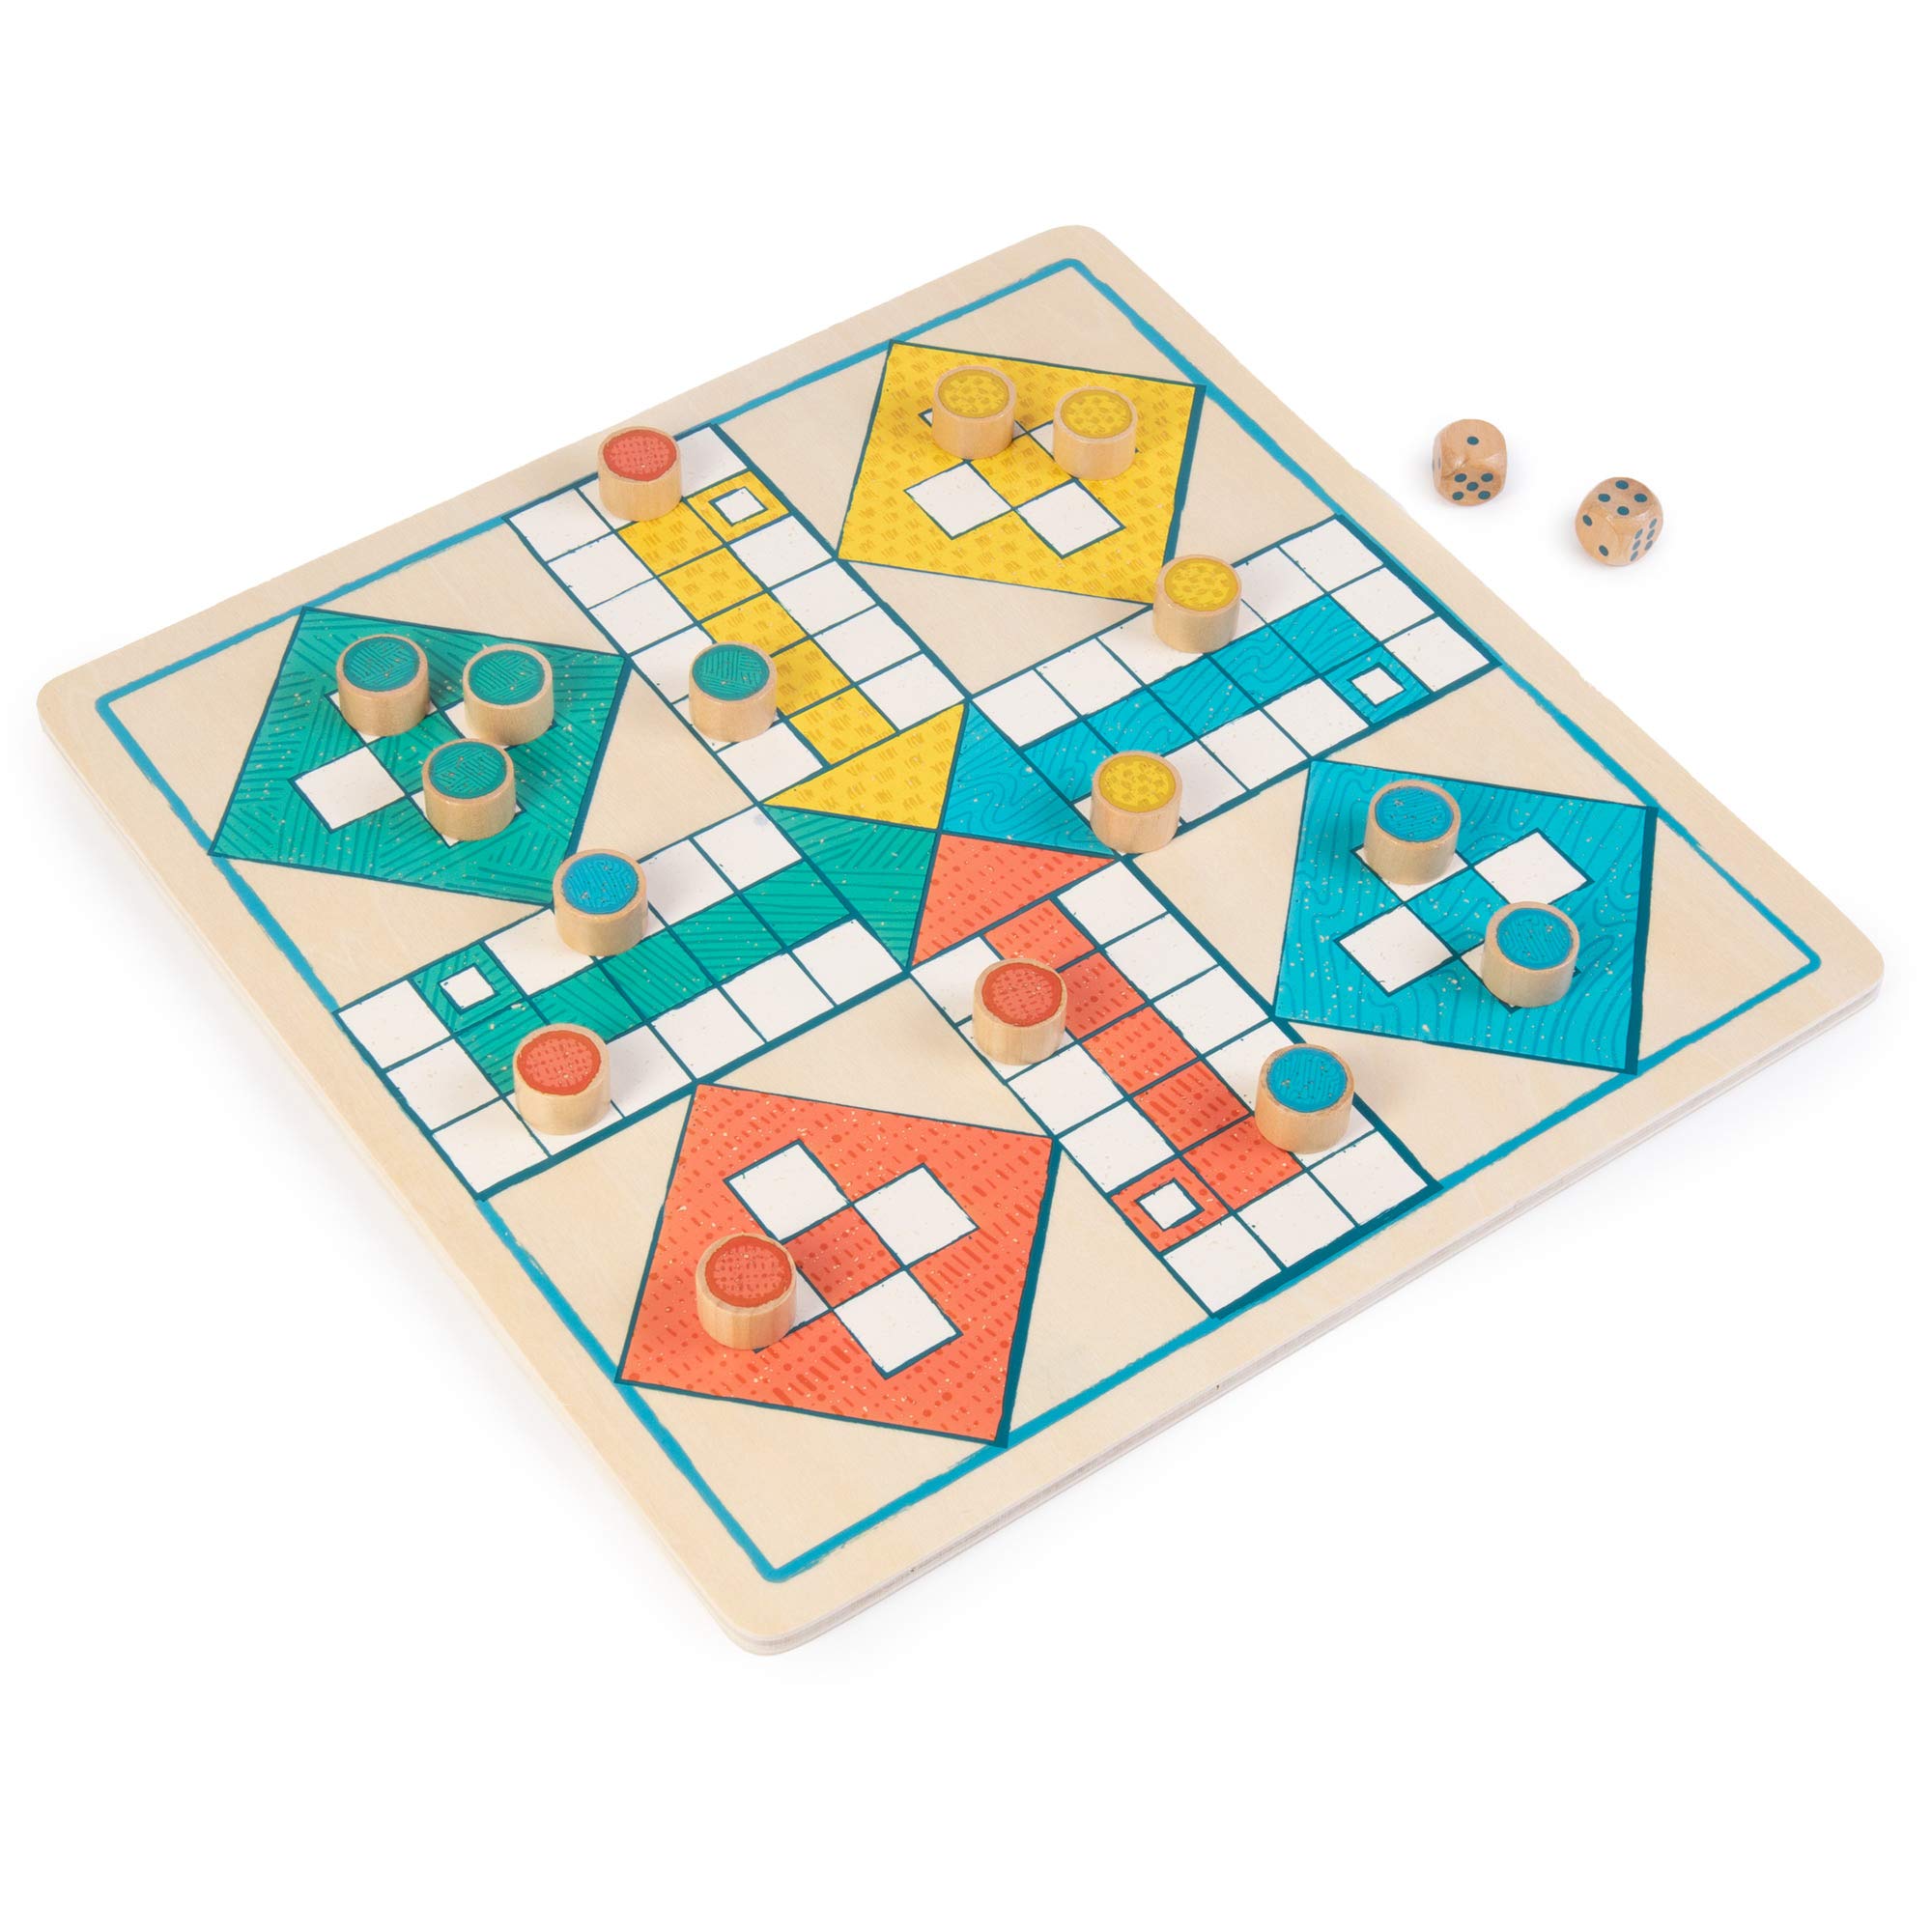 2 Games in 1 Wooden Combo Table Game Set - Includes Ludo and Snakes & Ladders!